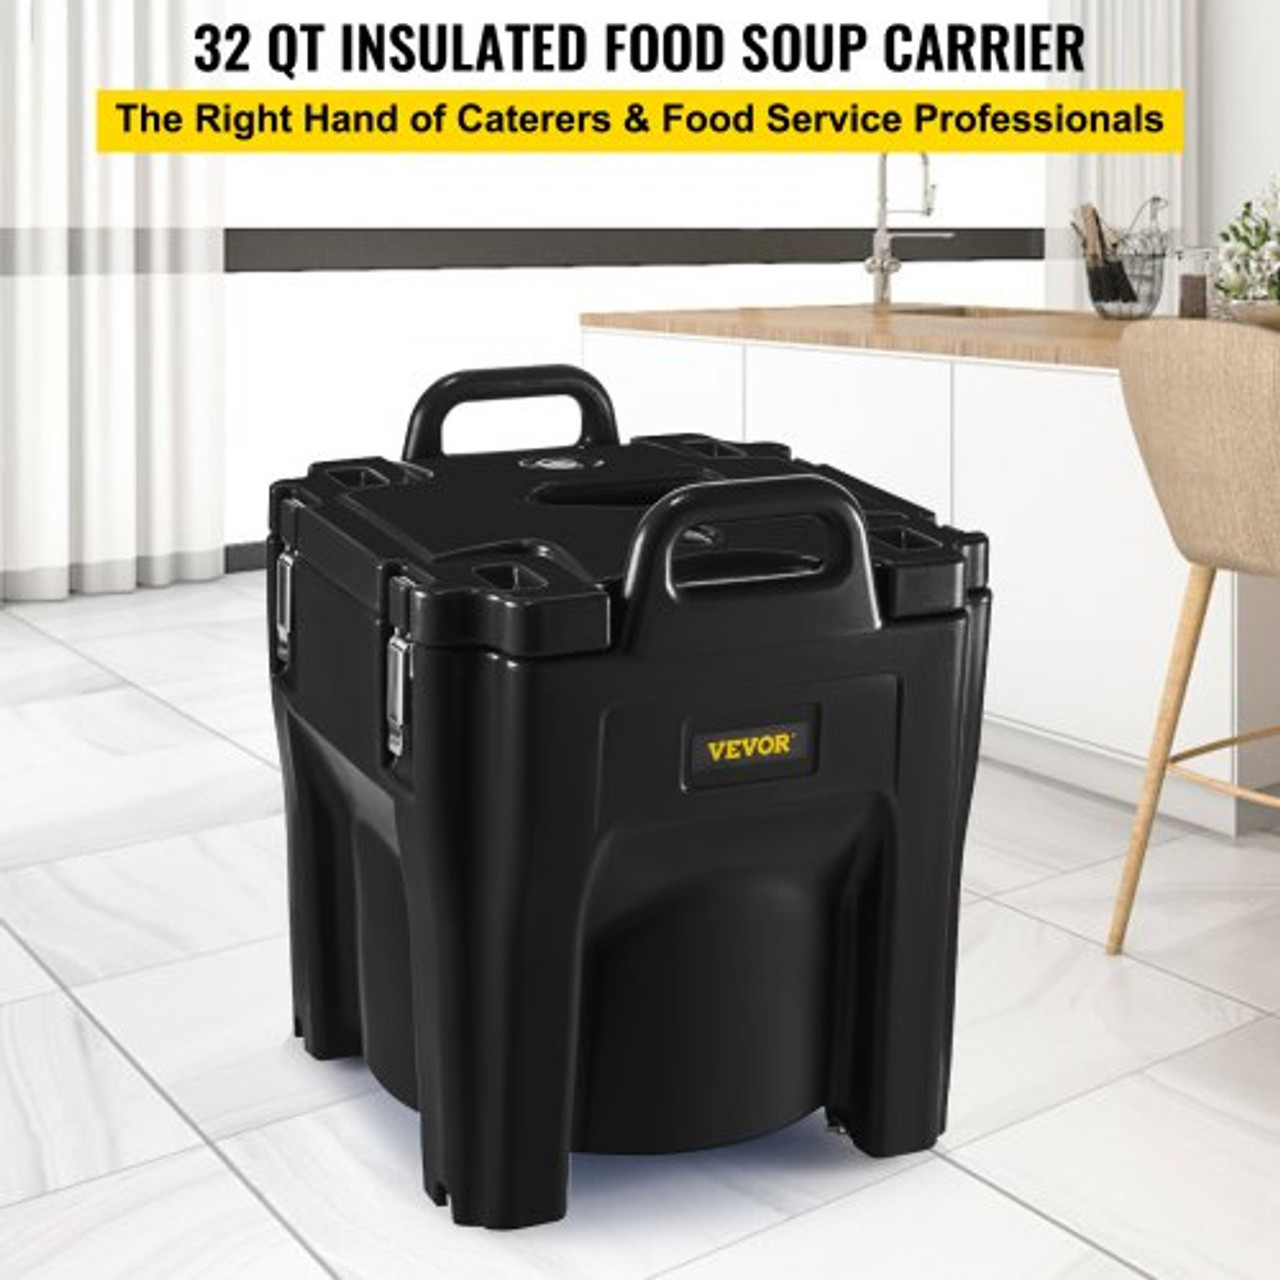 Insulated Food Carrier, 32Qt Capacity, Stackable Catering Hot Box w/Stainless Steel Barrel, Top Load LLDPE Food Warmer w/Integral Handles Buckles Stationary Base, for Restaurant Canteen, Black